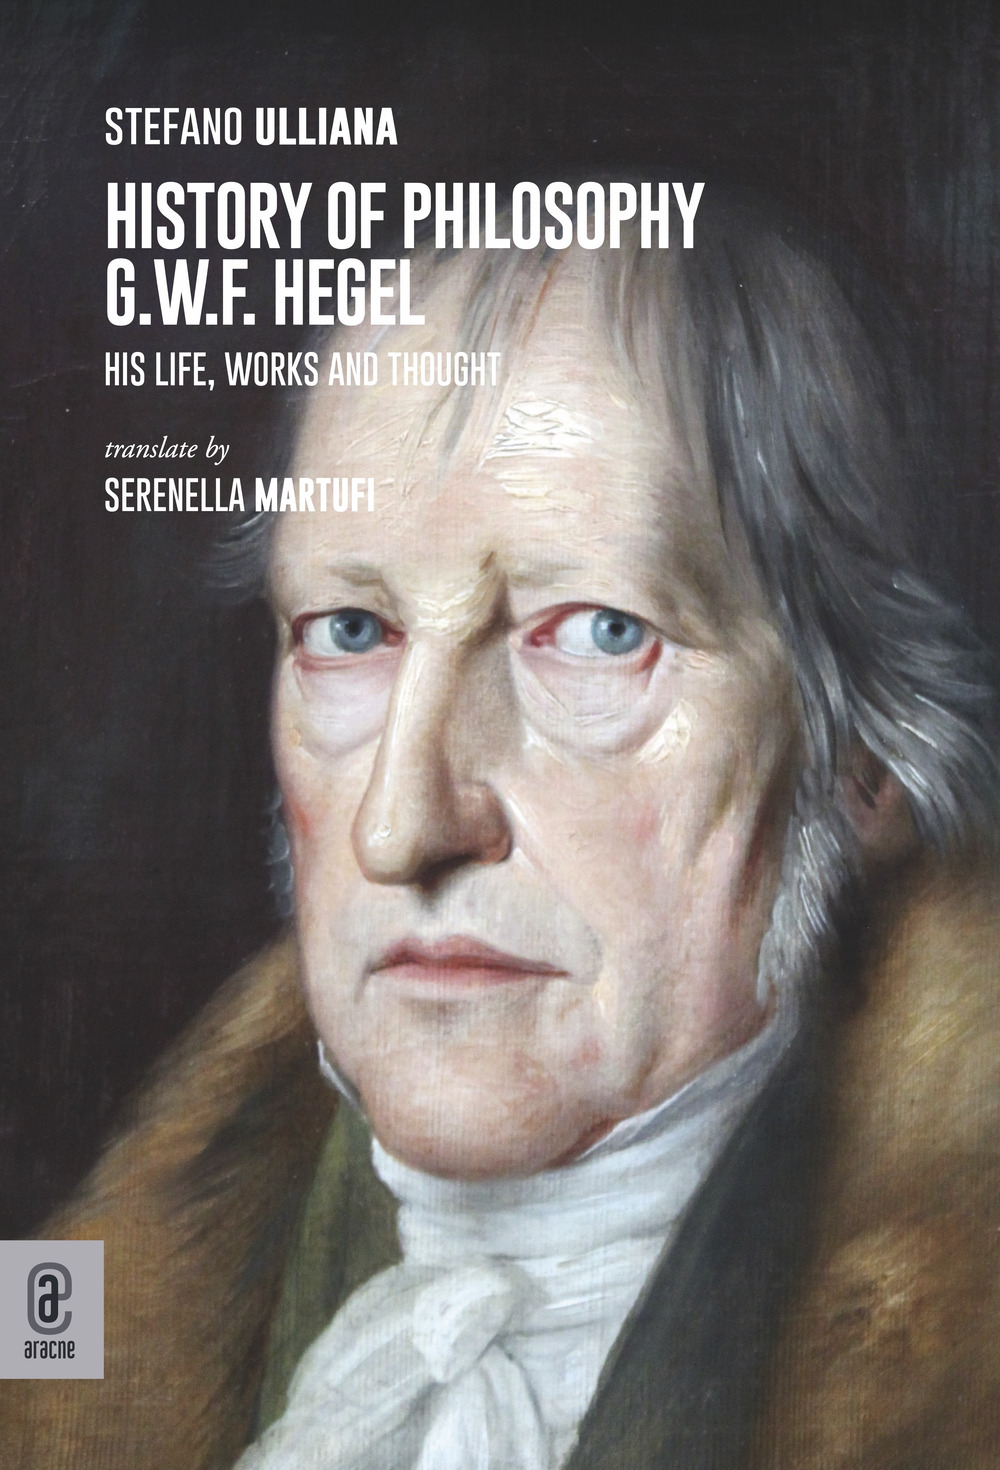 History of philosophy G.W.F. Hegel. His life, works and thought